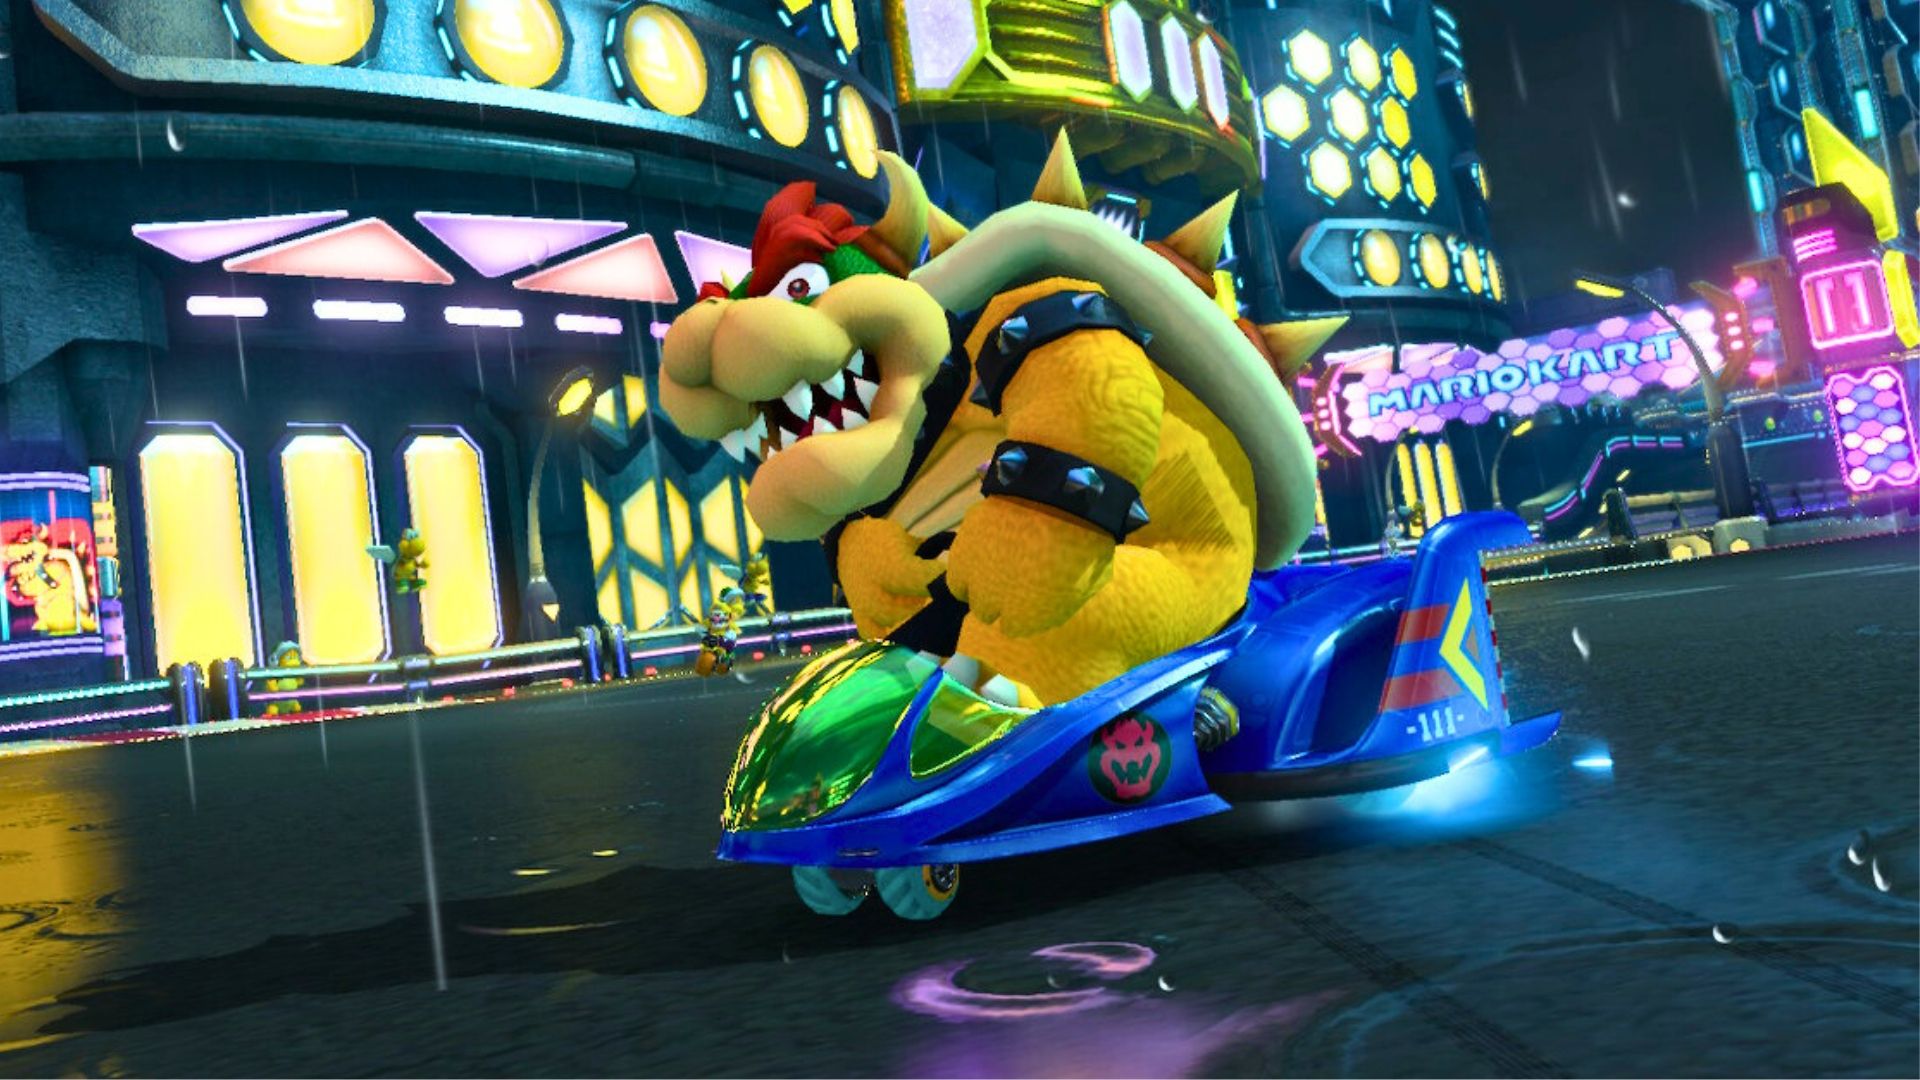 Mario Kart 8 Deluxe replay closeup of Bowser in the Blue Falcon Kart